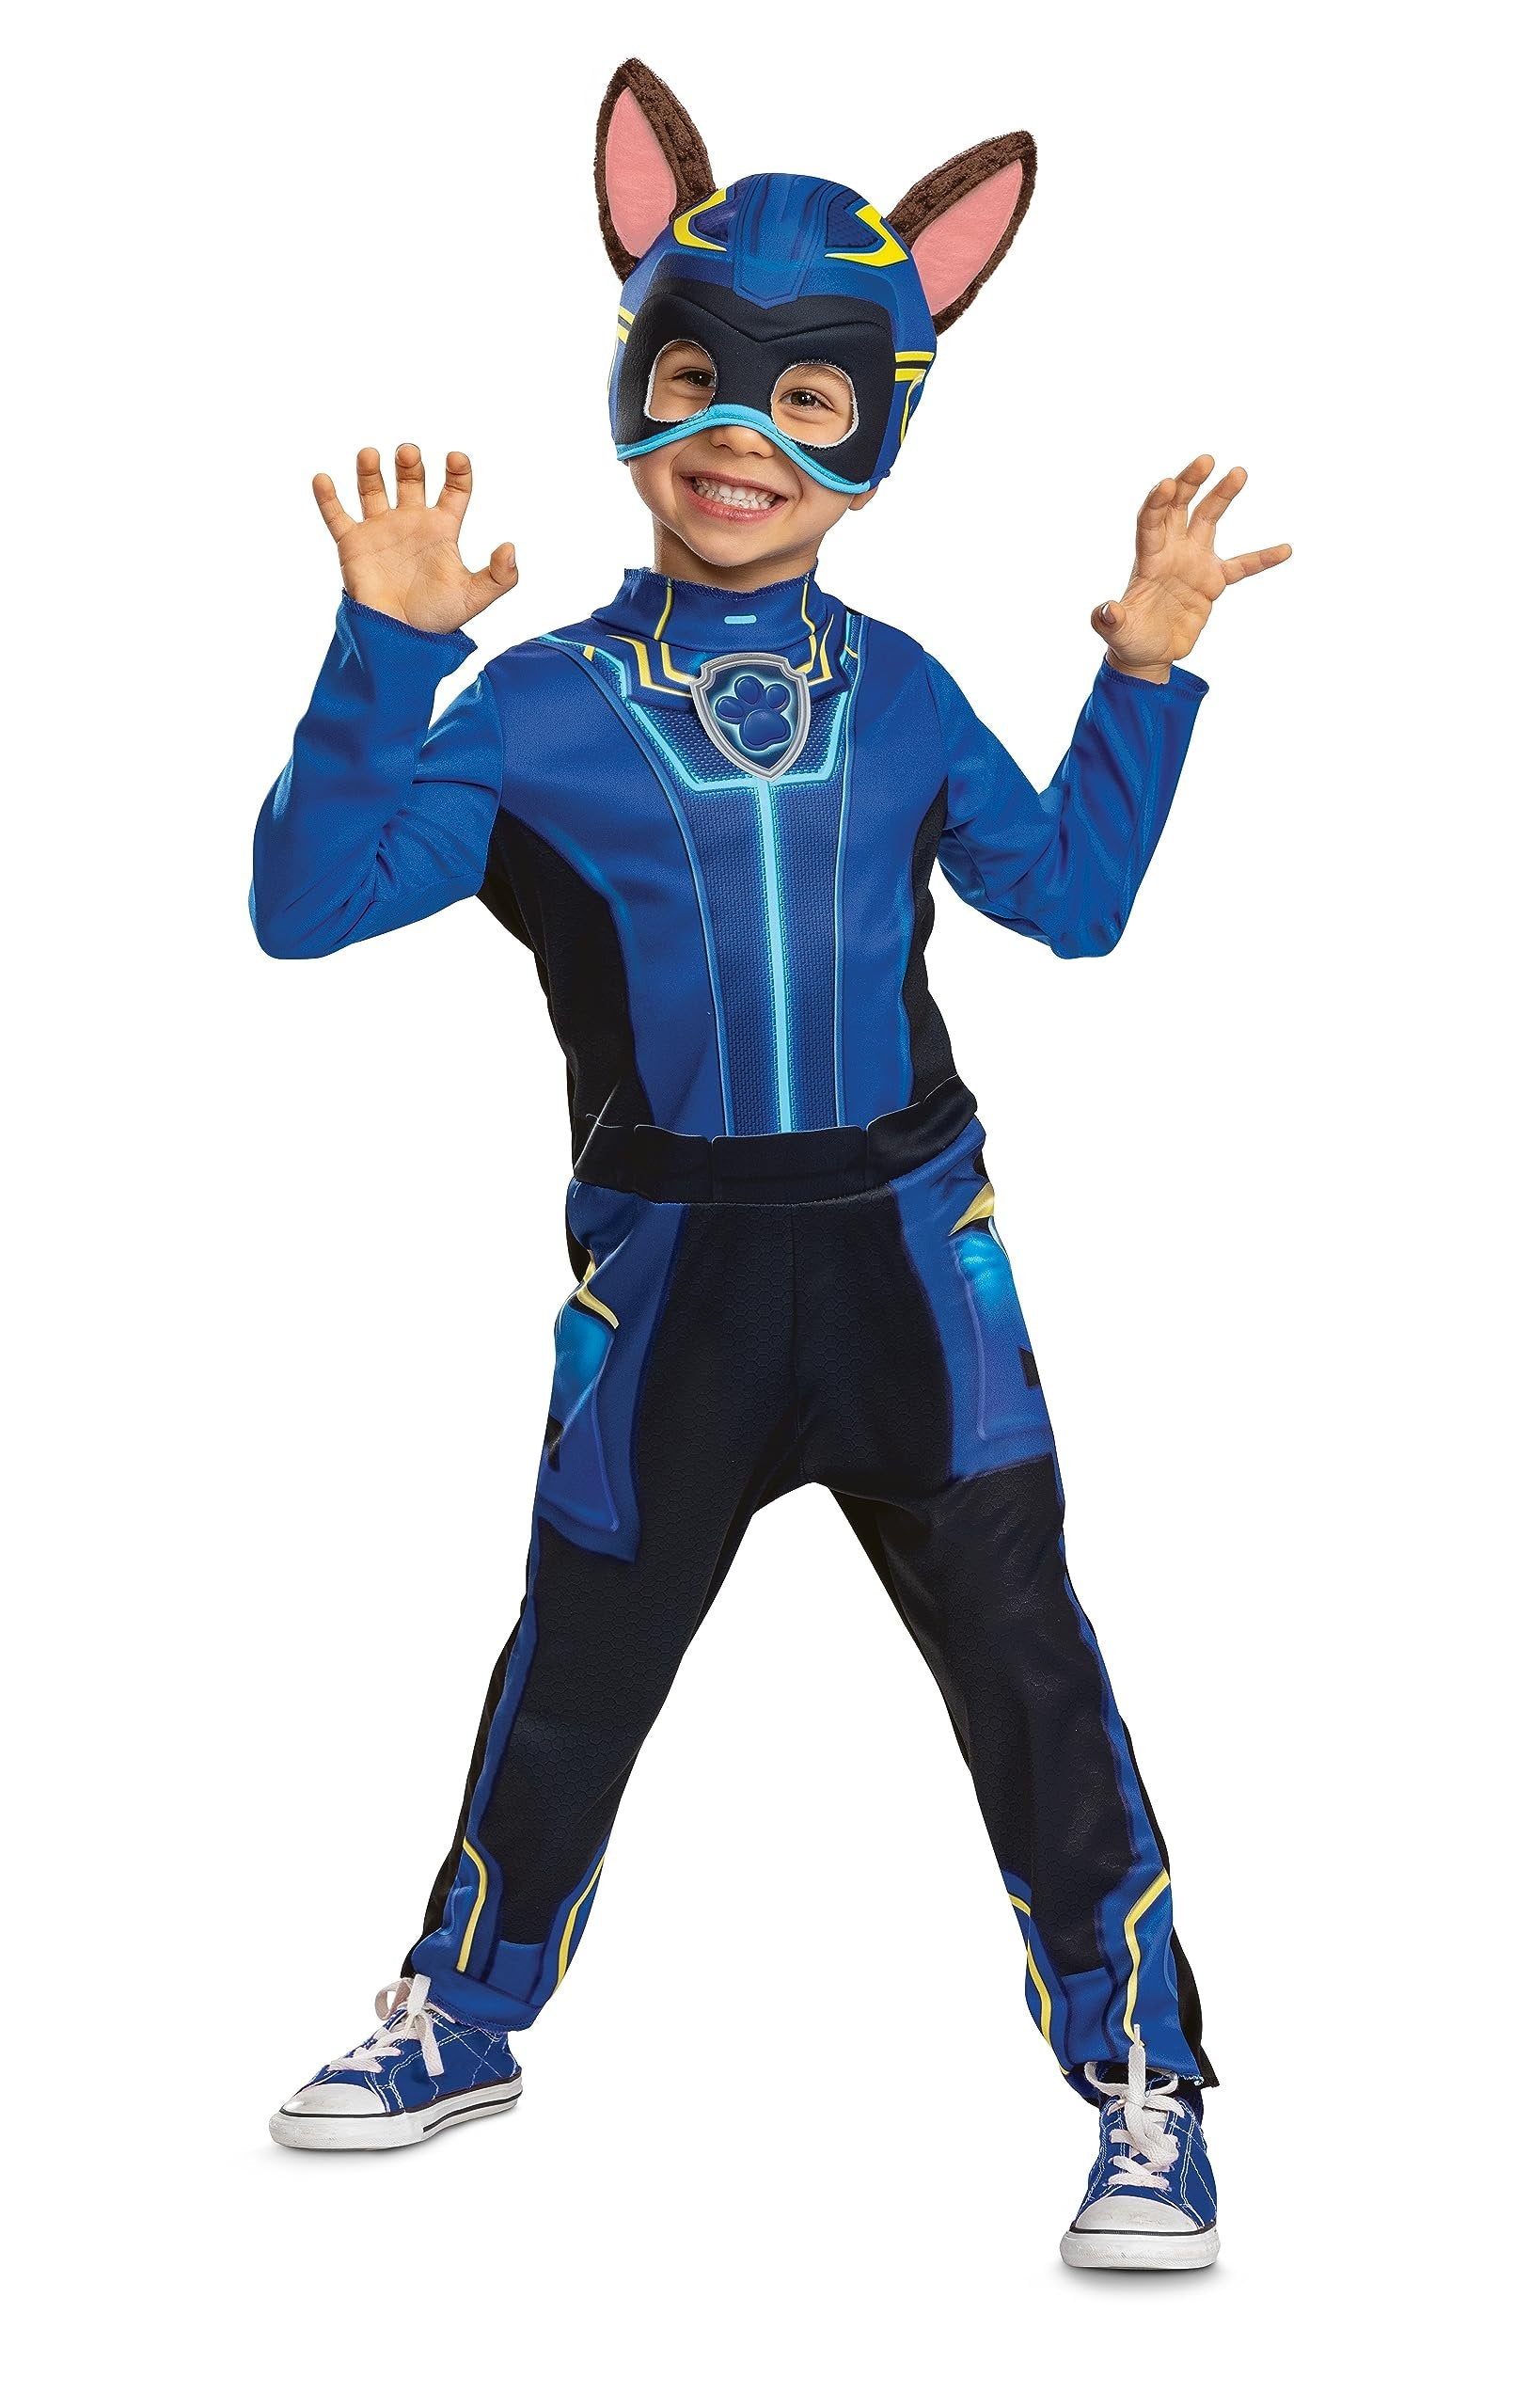 Chase Paw Patrol Costume, Official Toddler Paw Patrol Halloween Outfit with Headpiece for Kids, Size (4-6)